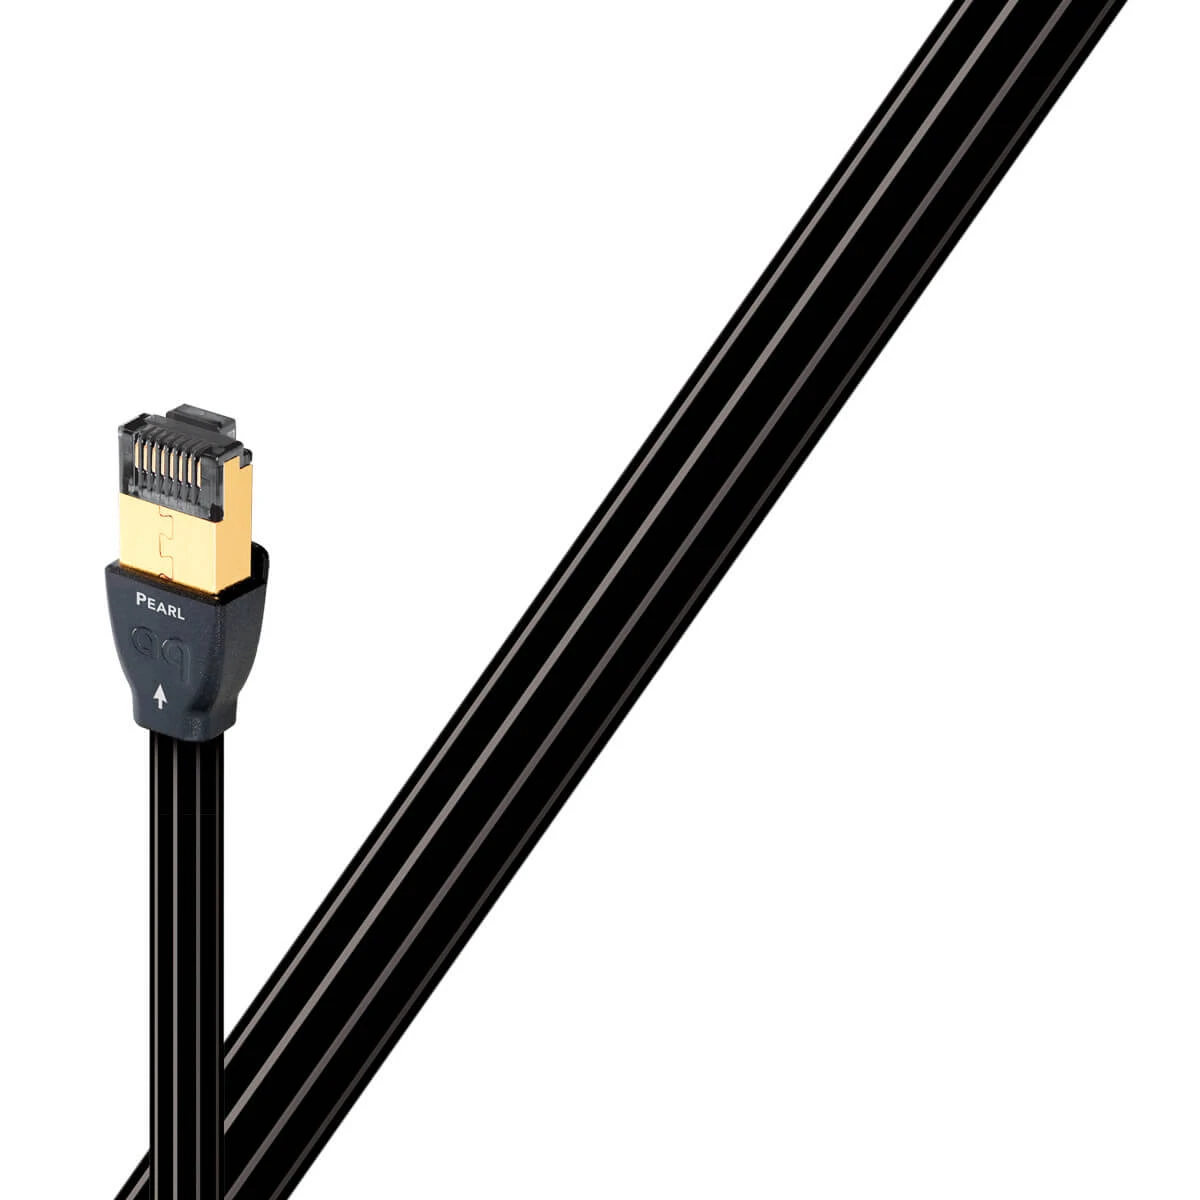 Audioquest Pearl, Ethernet-Kabel